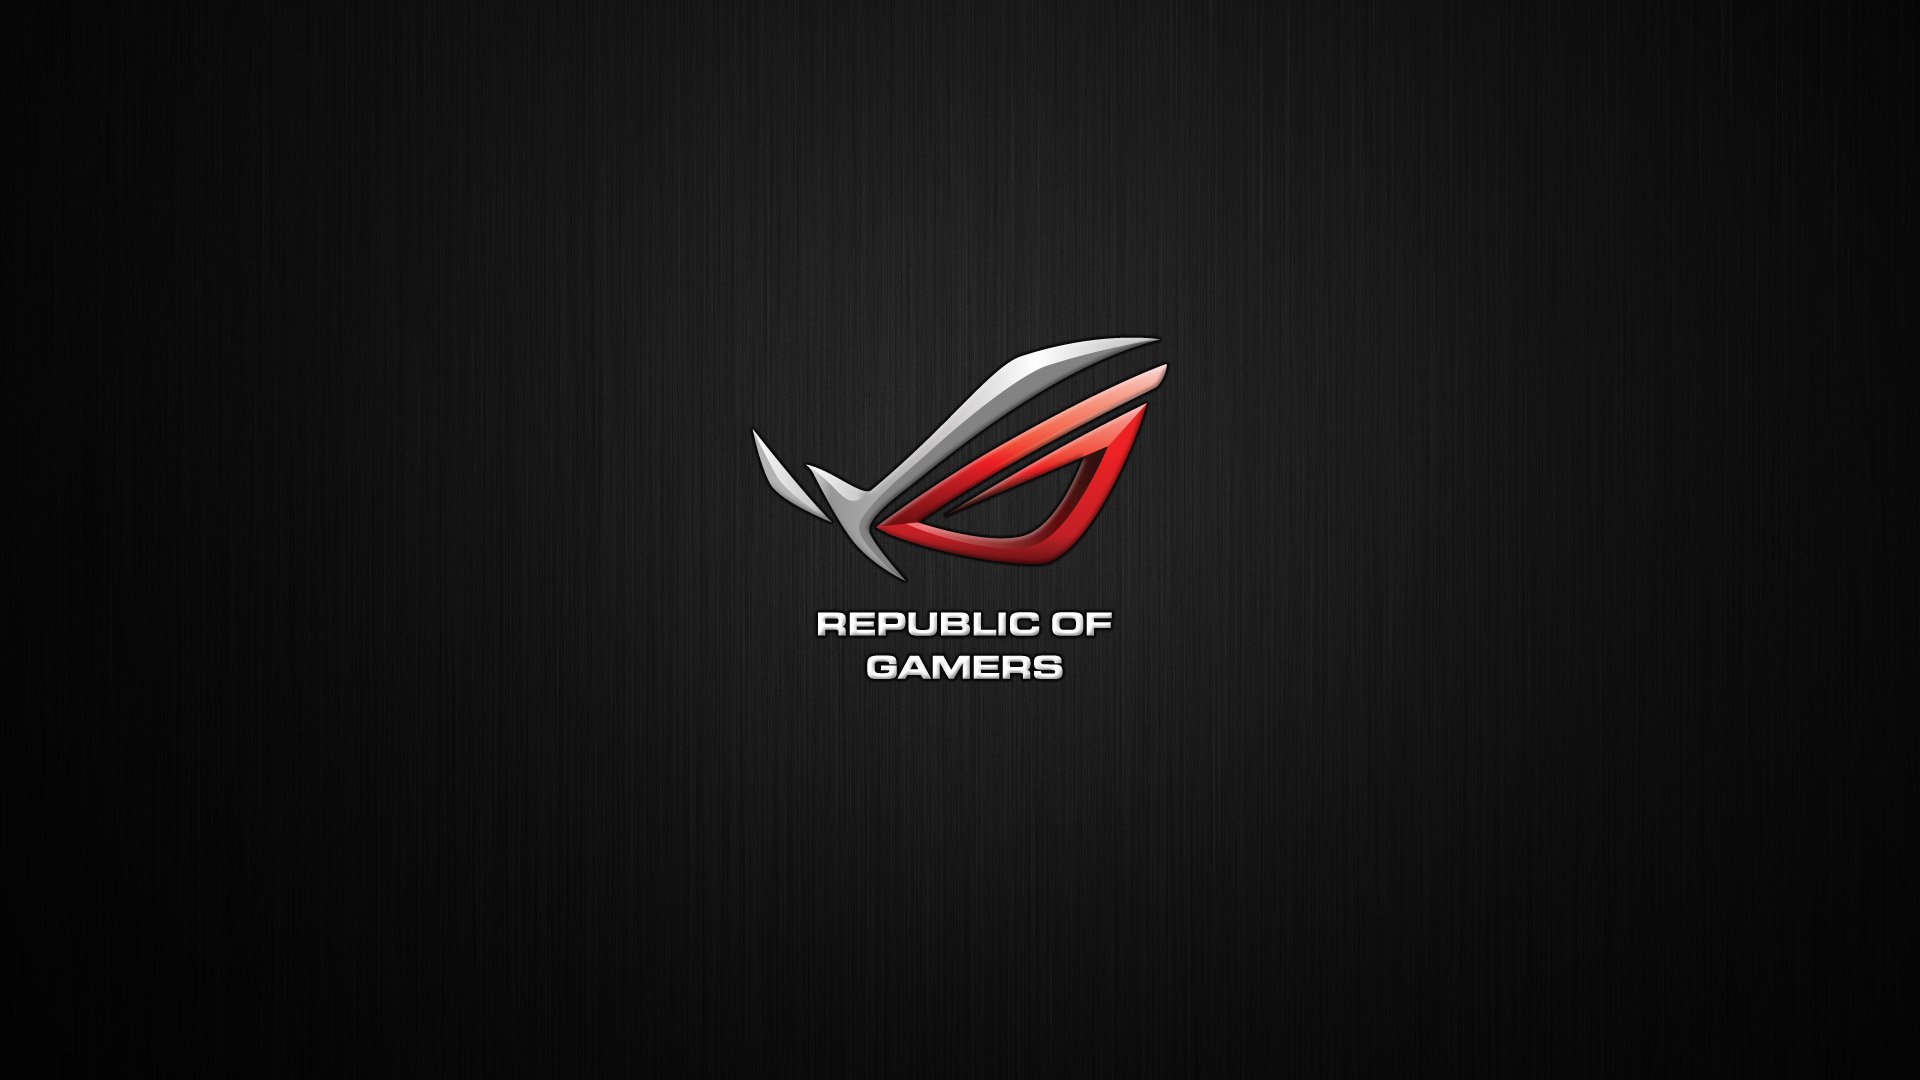 Wallpaper Competition Vote For Your Favorite Republic of Gamers 1920x1080